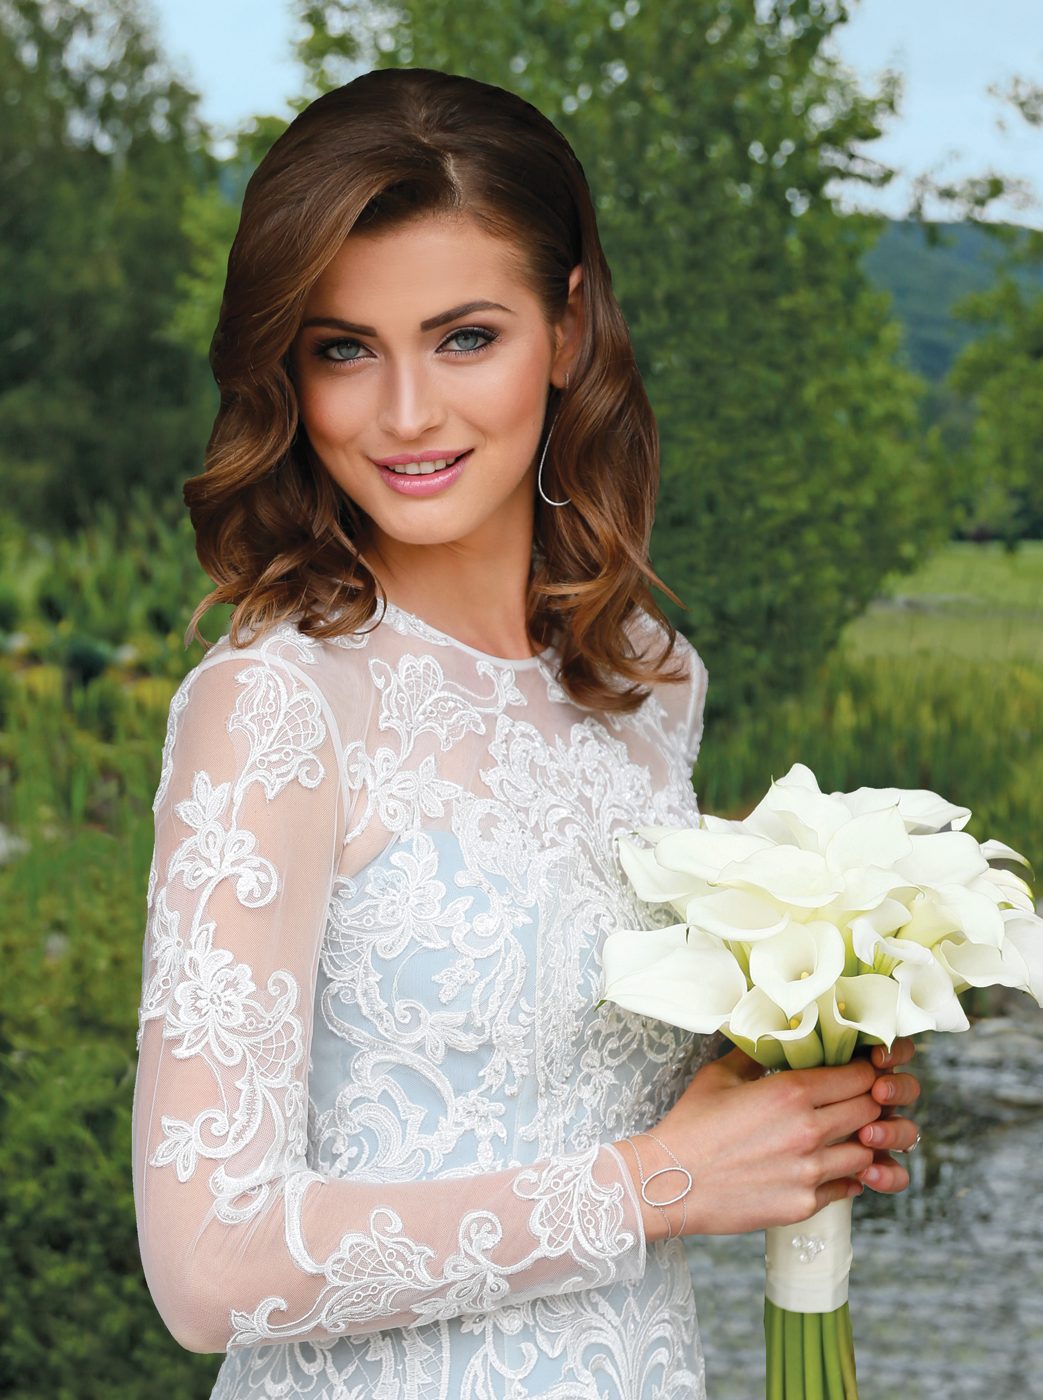 Gown: Oleg Cassini at David's Bridal (CWG782, $1,158), Ariston Flowers, Jewelry: KVO Collections